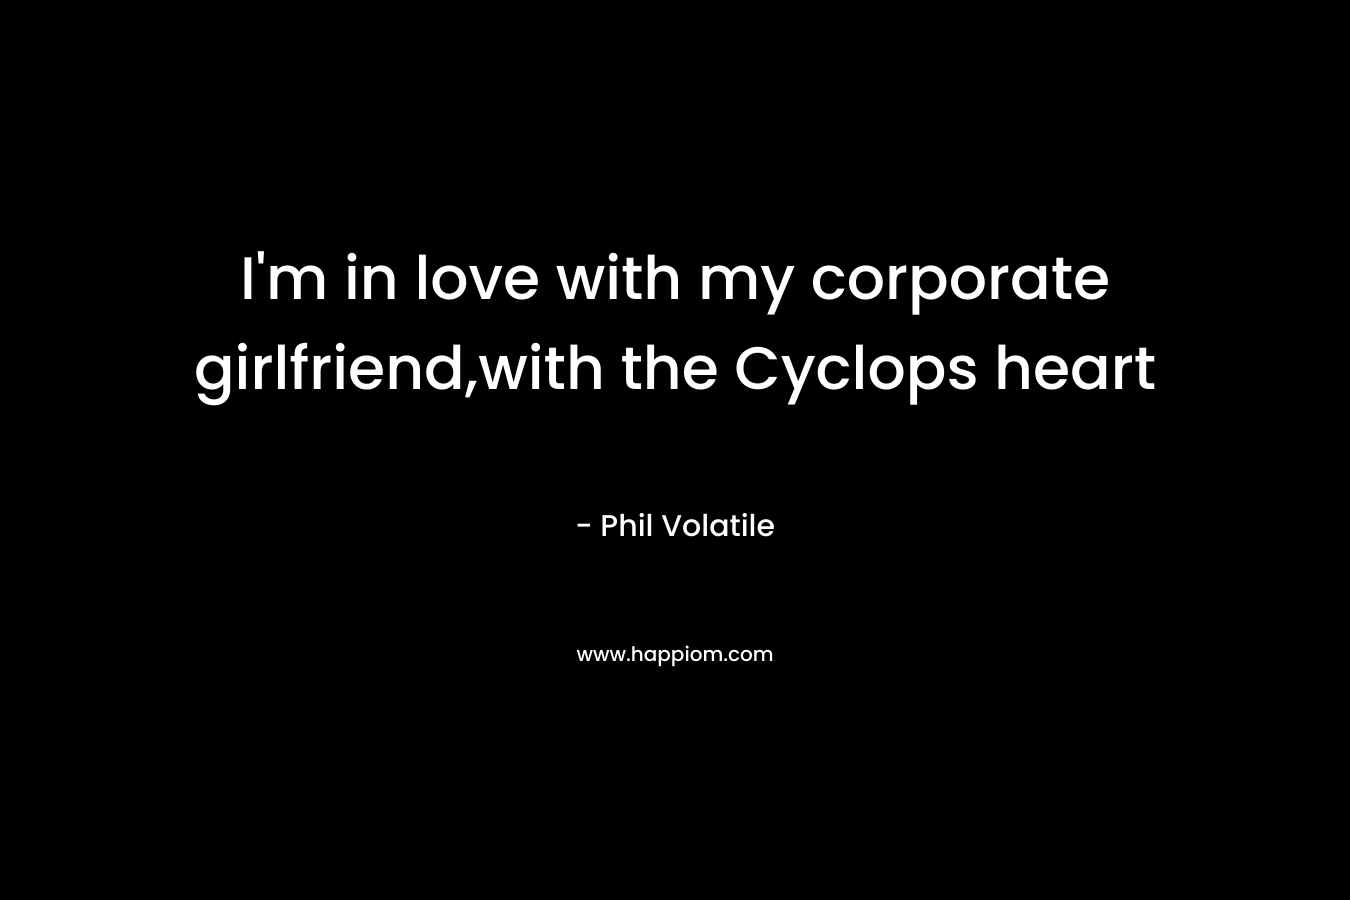 I'm in love with my corporate girlfriend,with the Cyclops heart